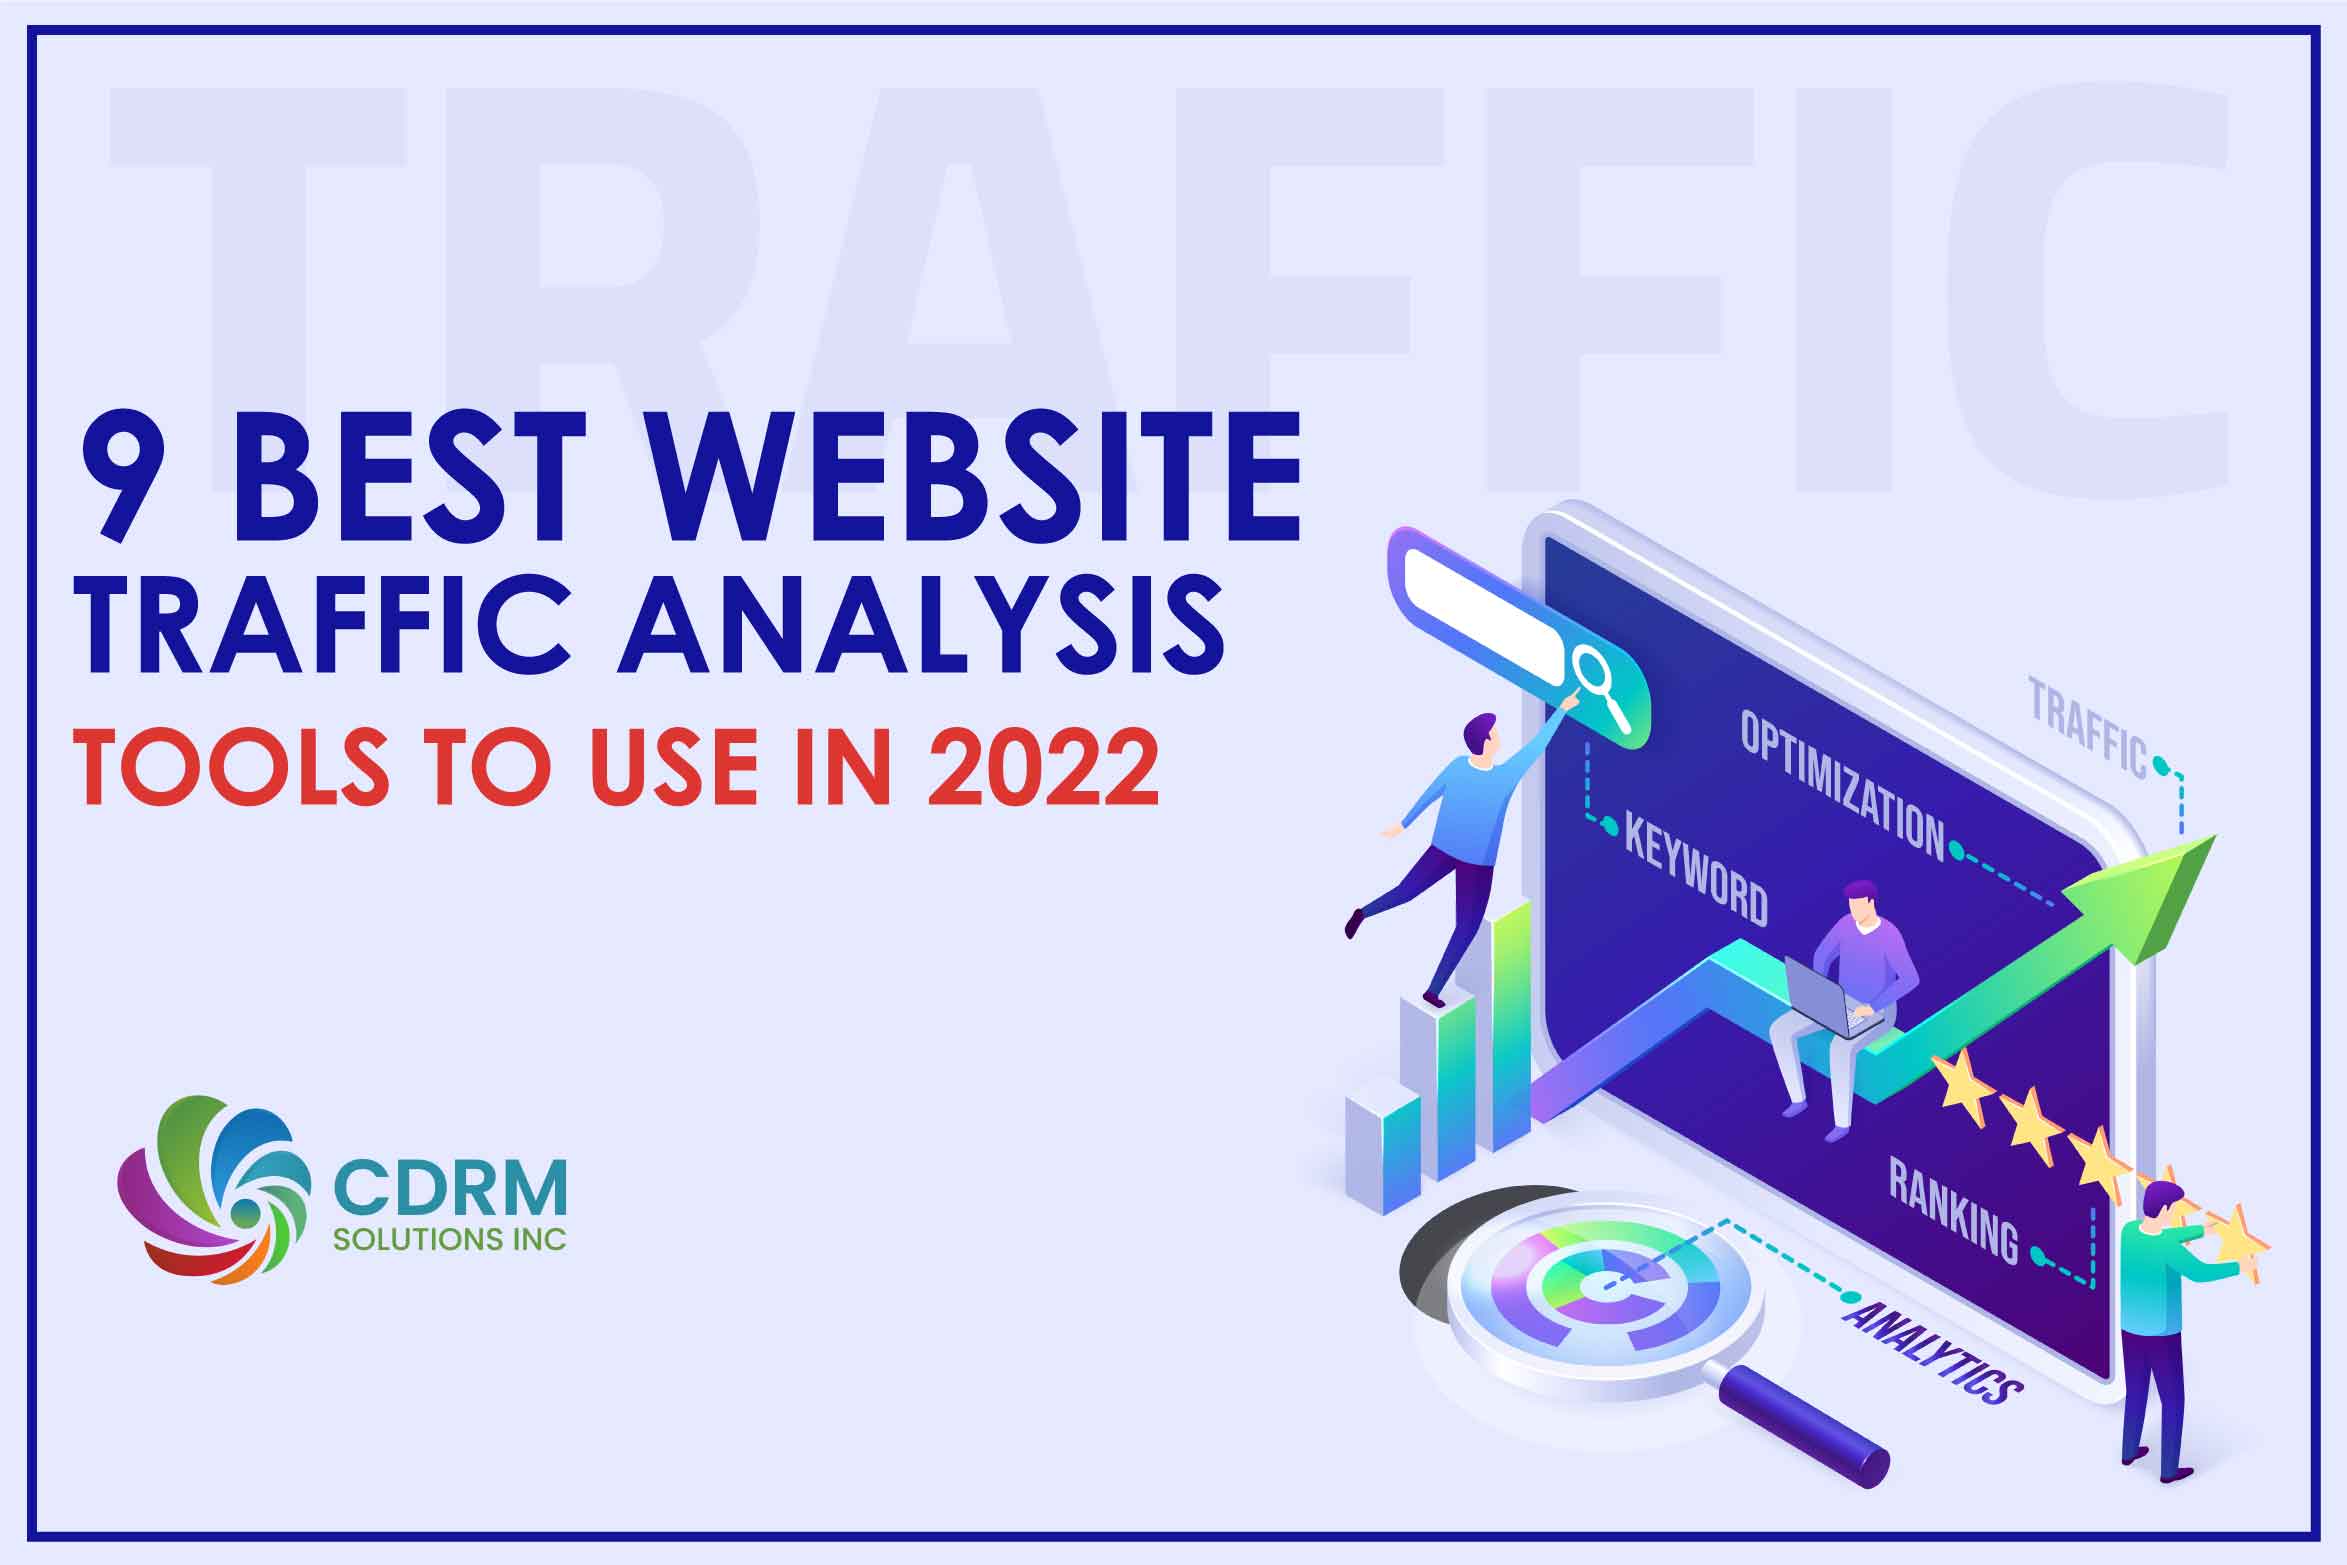 9 Best Website Traffic Analysis Tools To Use In 2022